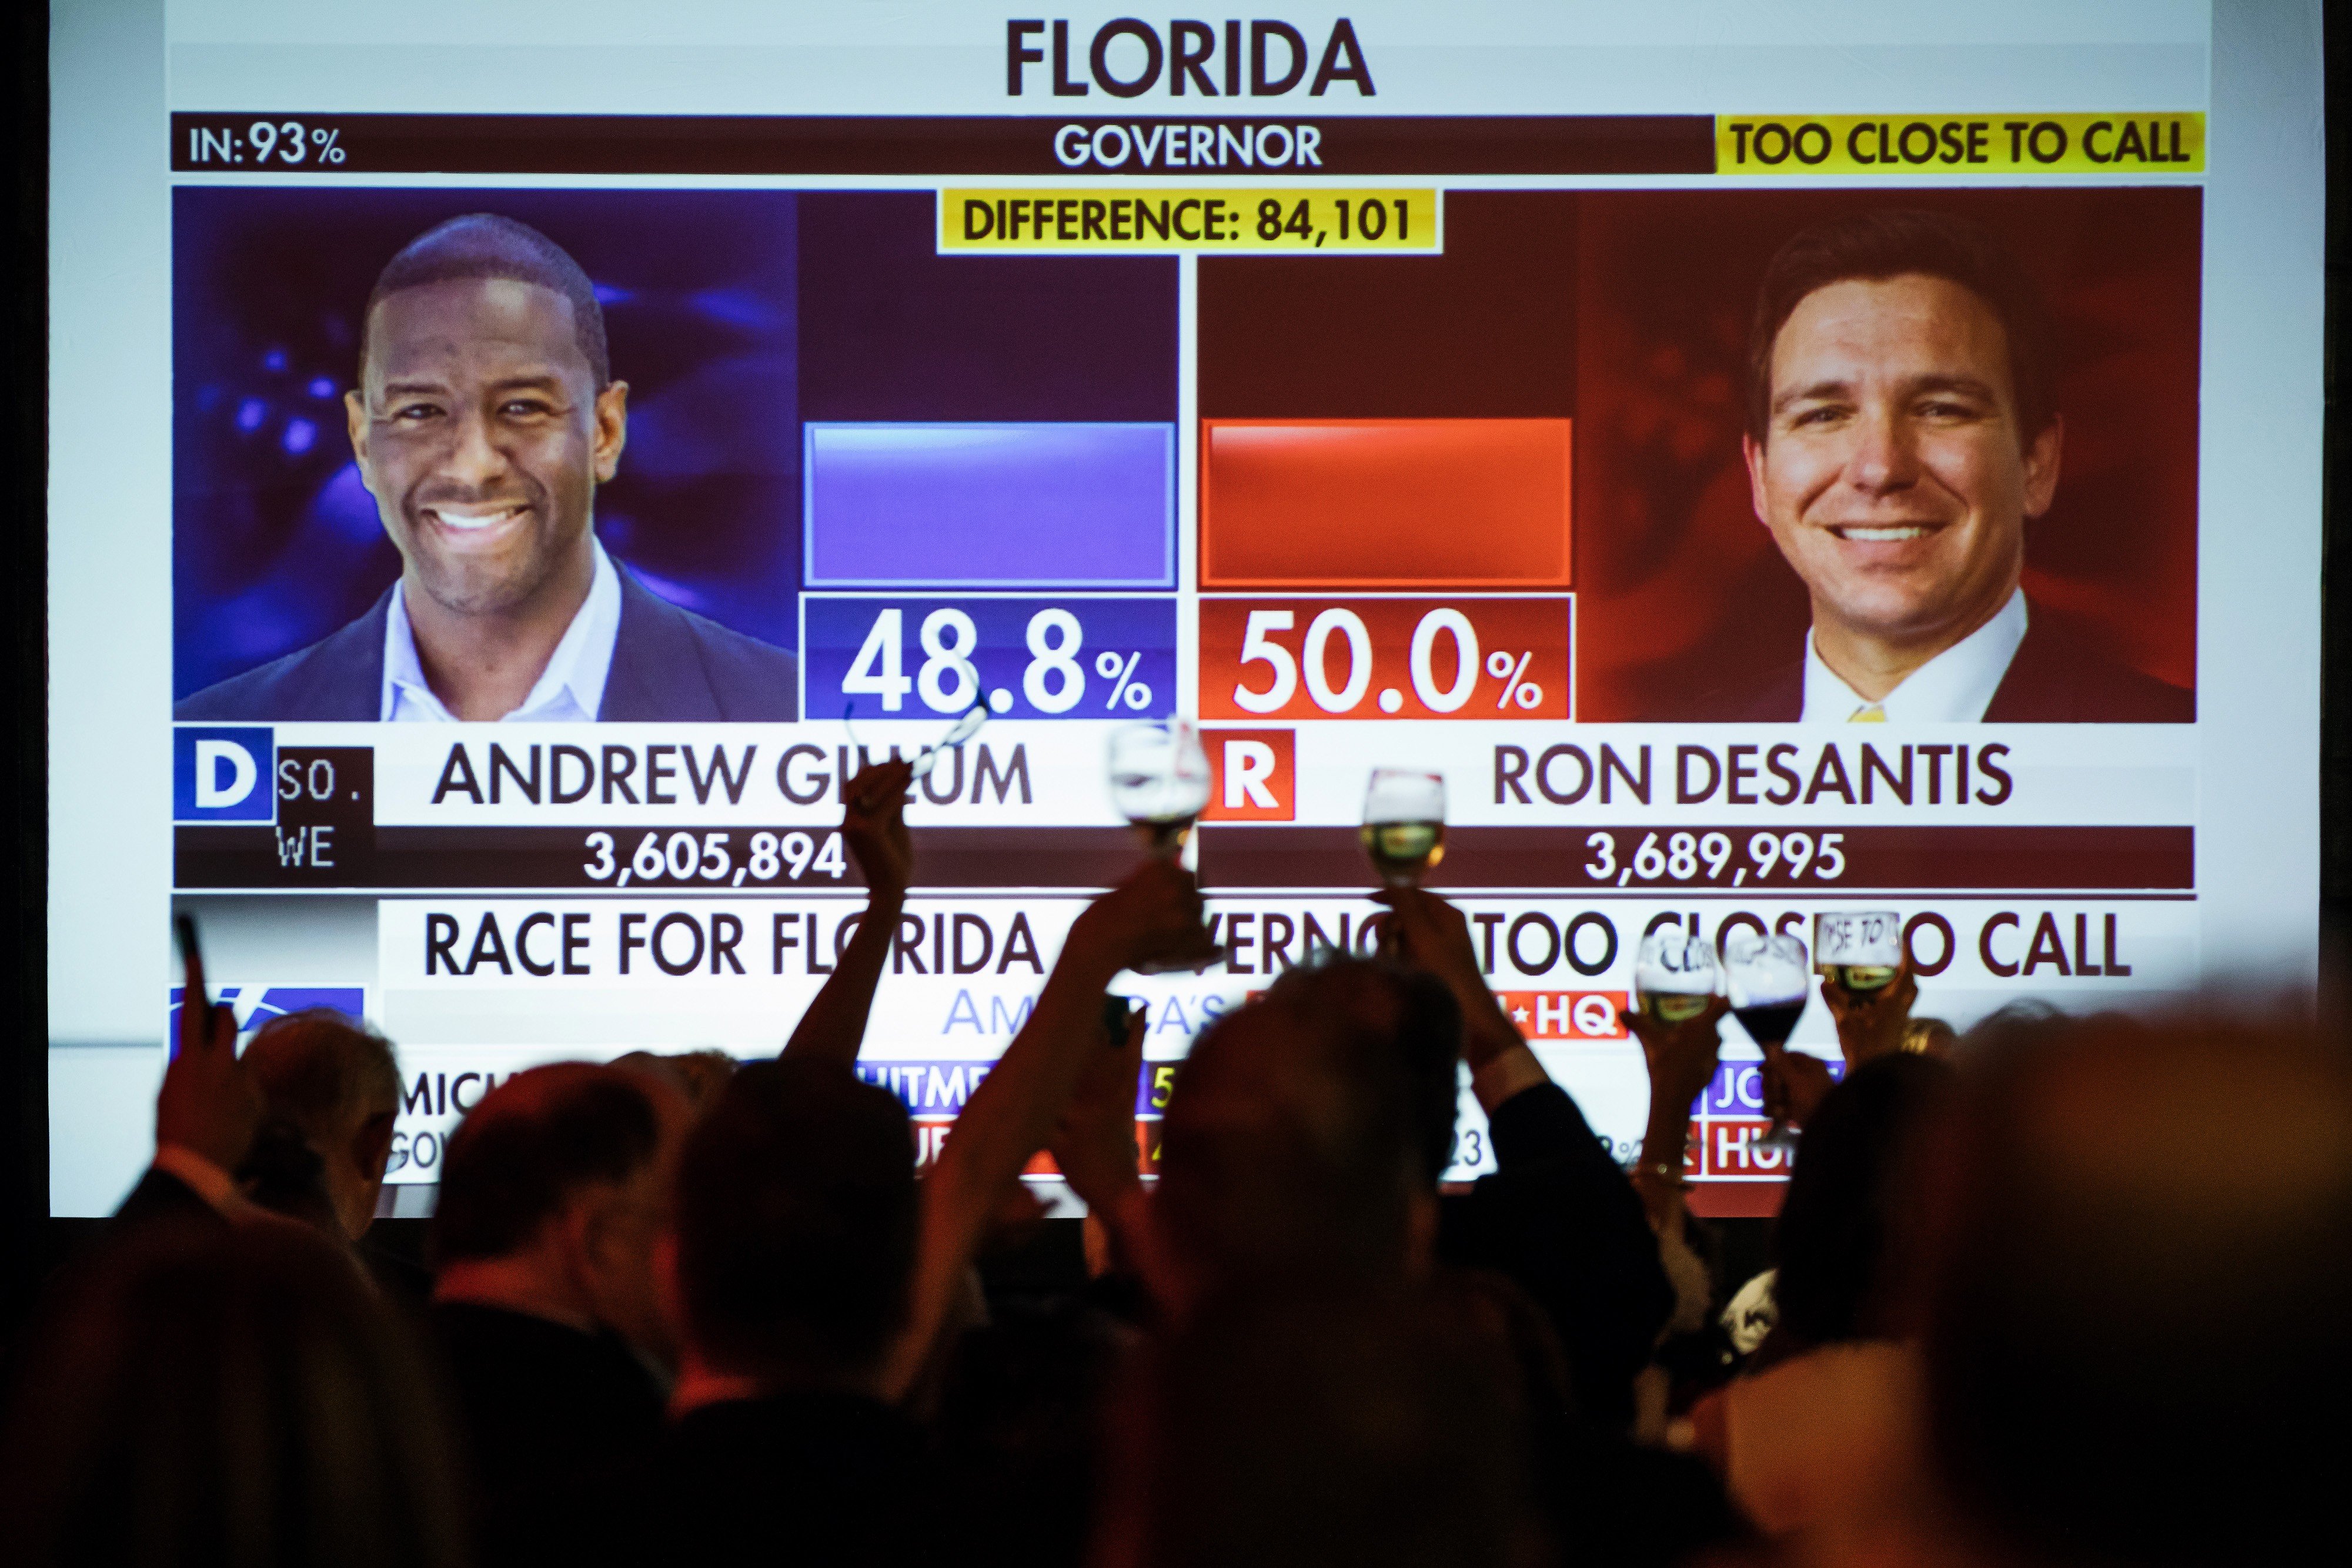 Andrew Gillum, the Democrat running for governor, was so certain he’d lost that he conceded late Tuesday and called Ron DeSantis to congratulate him on his win. Photo: Bloomberg